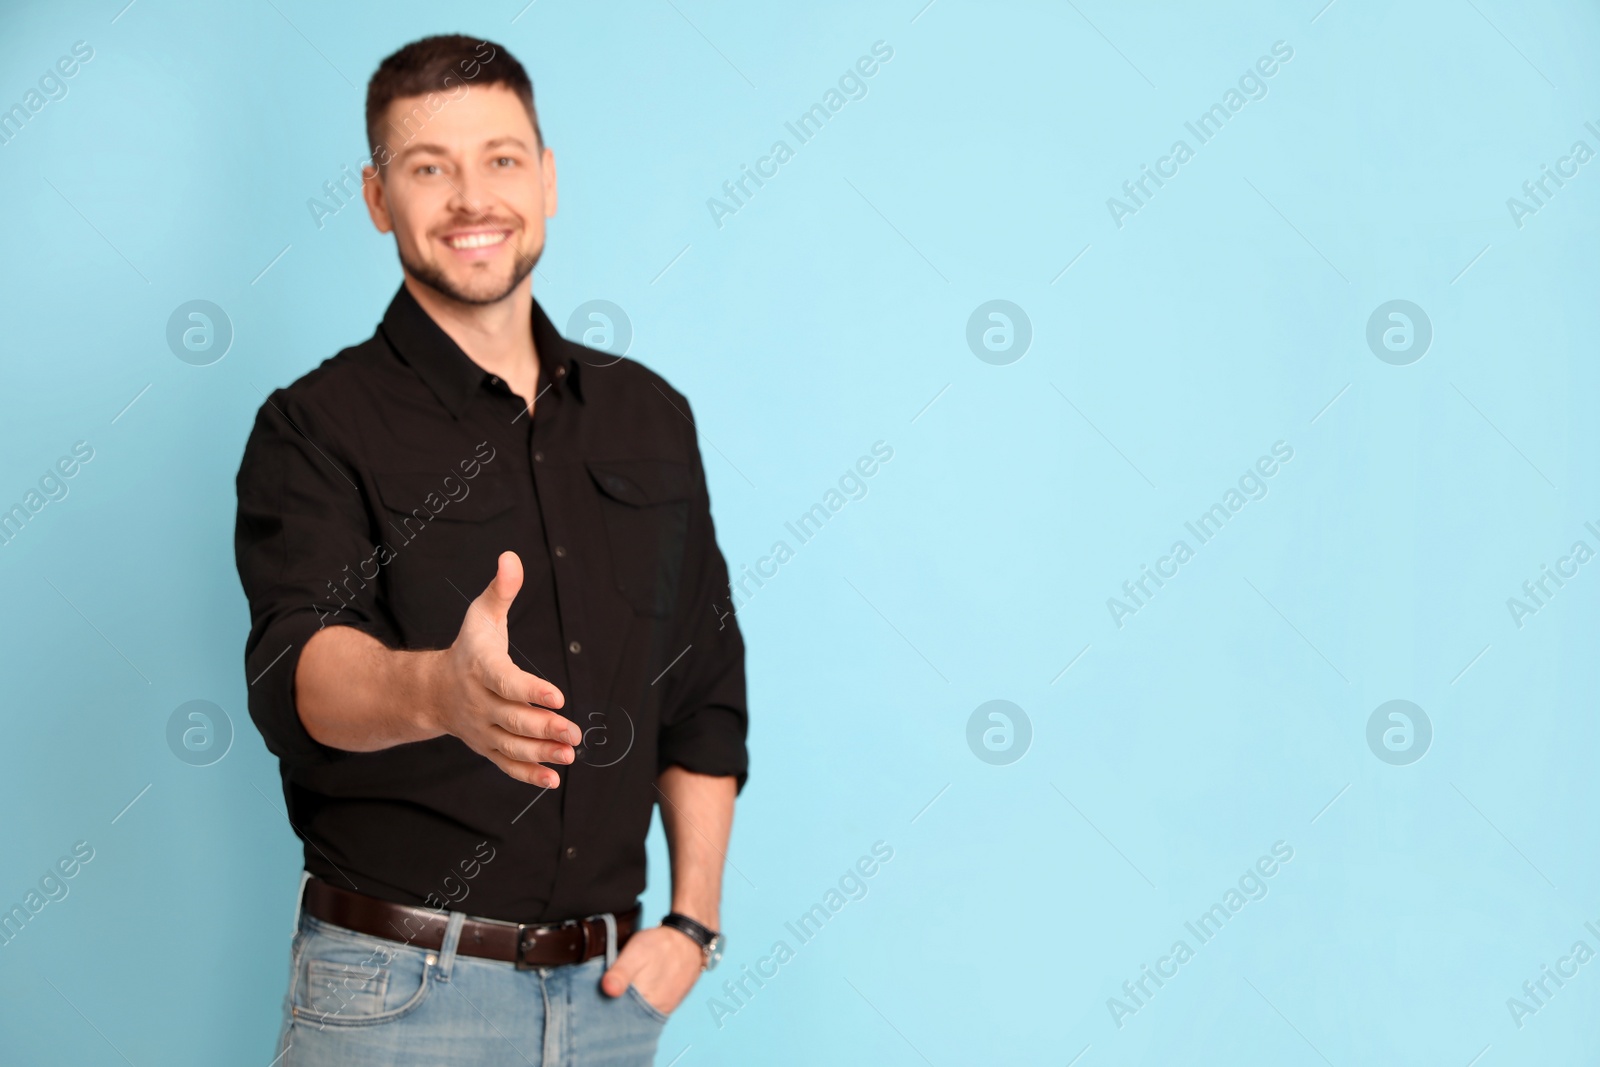 Photo of Businessman offering handshake against turquoise background, focus on hand. Space for text